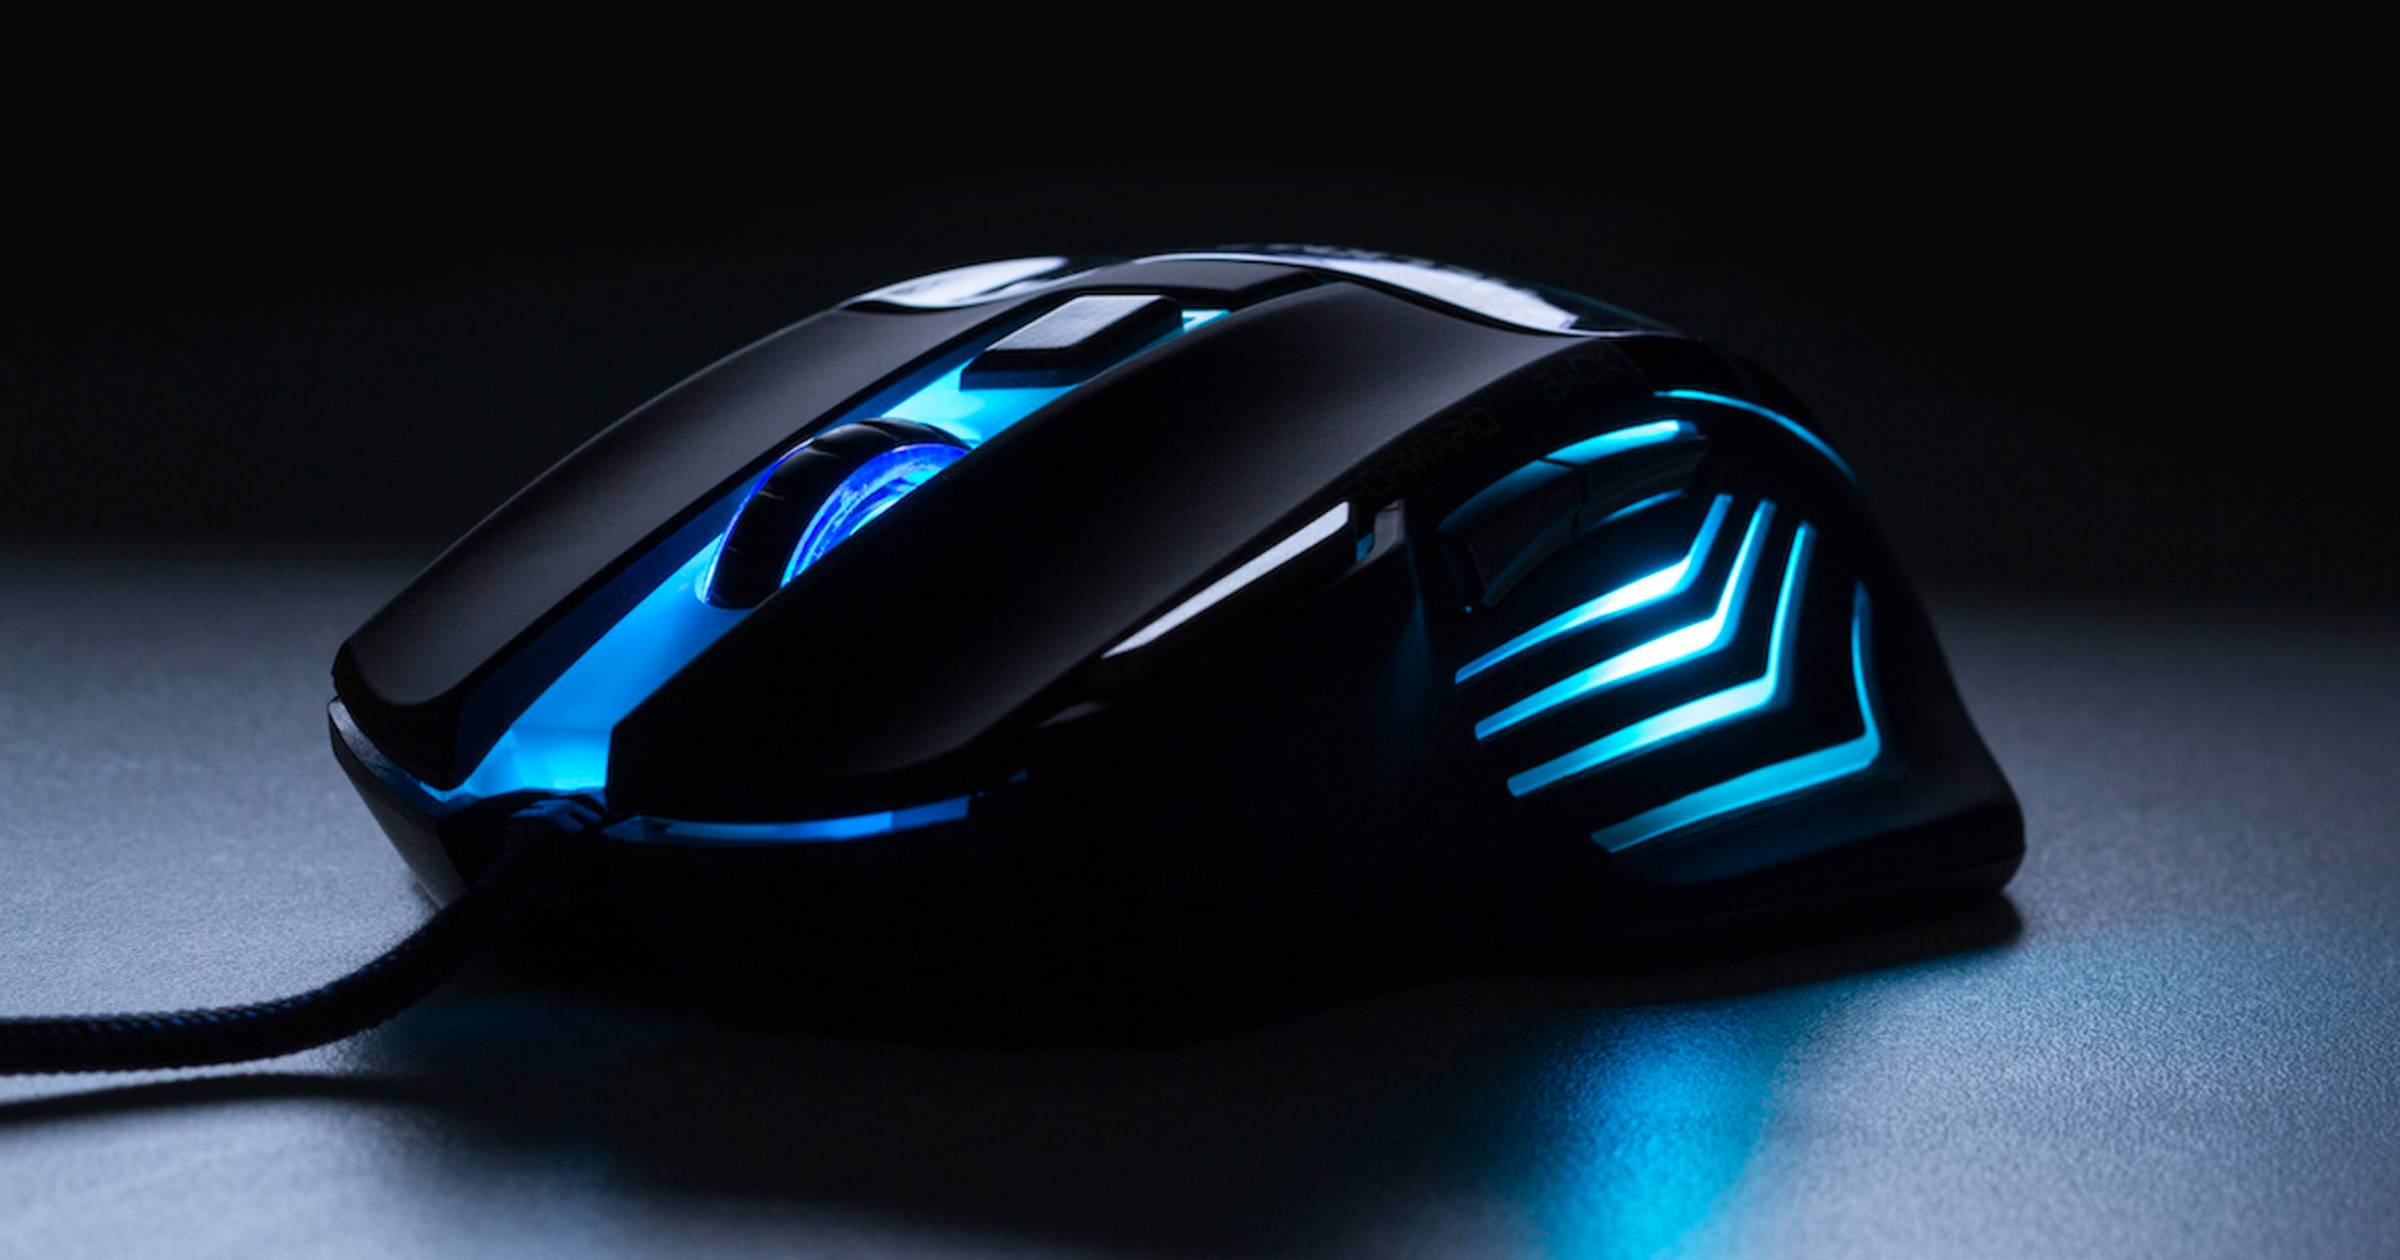 Which Mouse Is Better For Gaming?